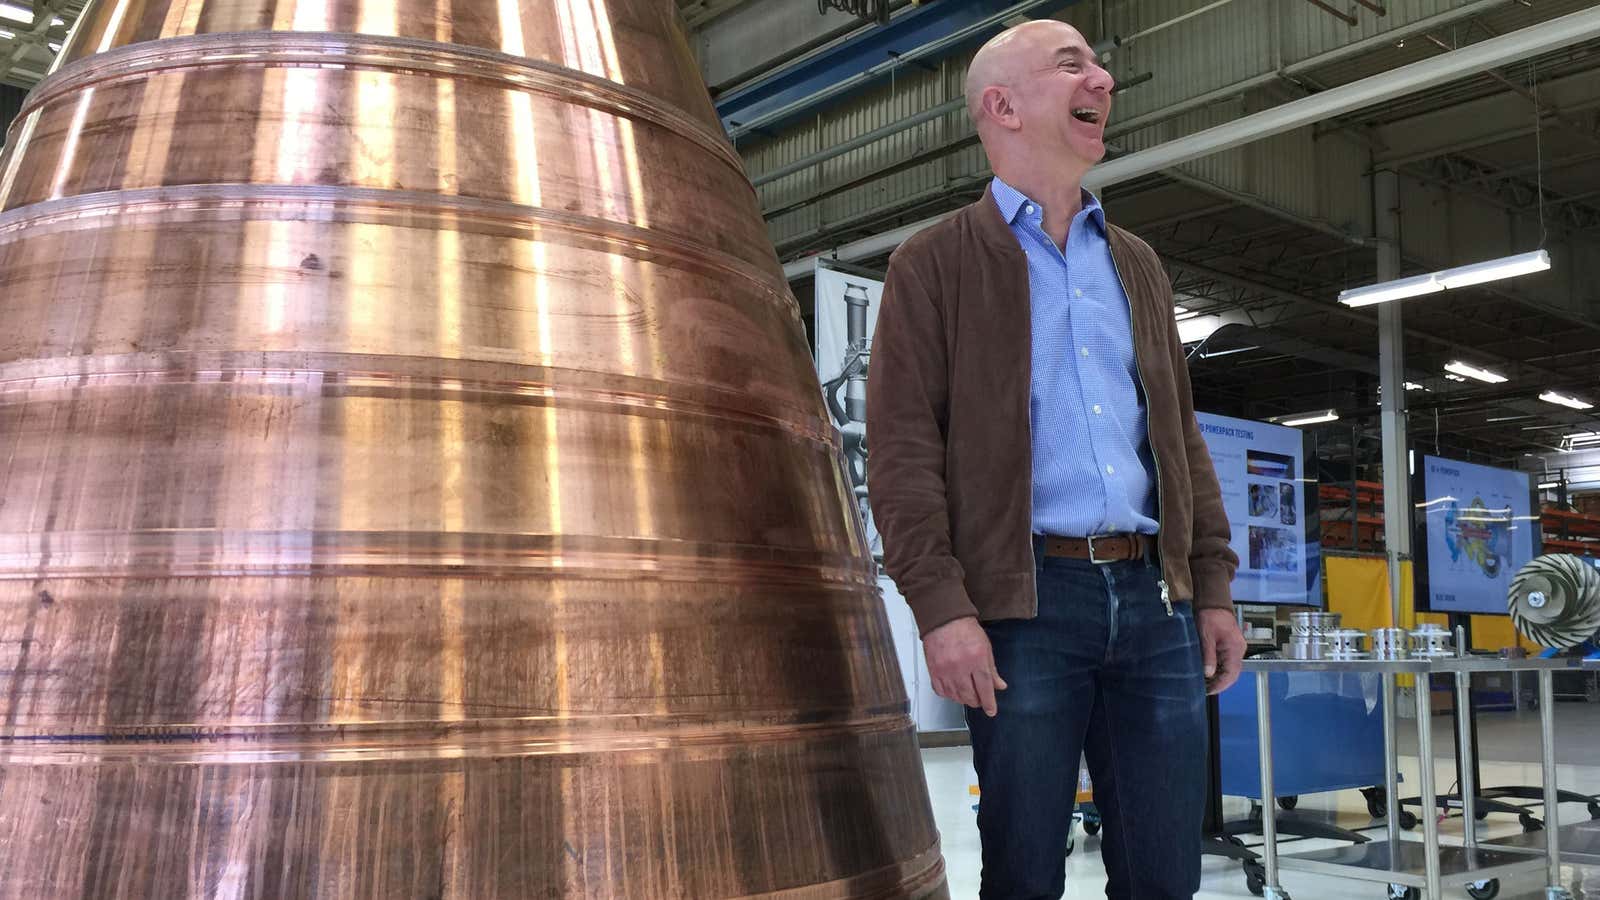 Amazon and Blue Origin founder Jeff Bezos stands next to a copper exhaust nozzle to be used on a space ship engine.